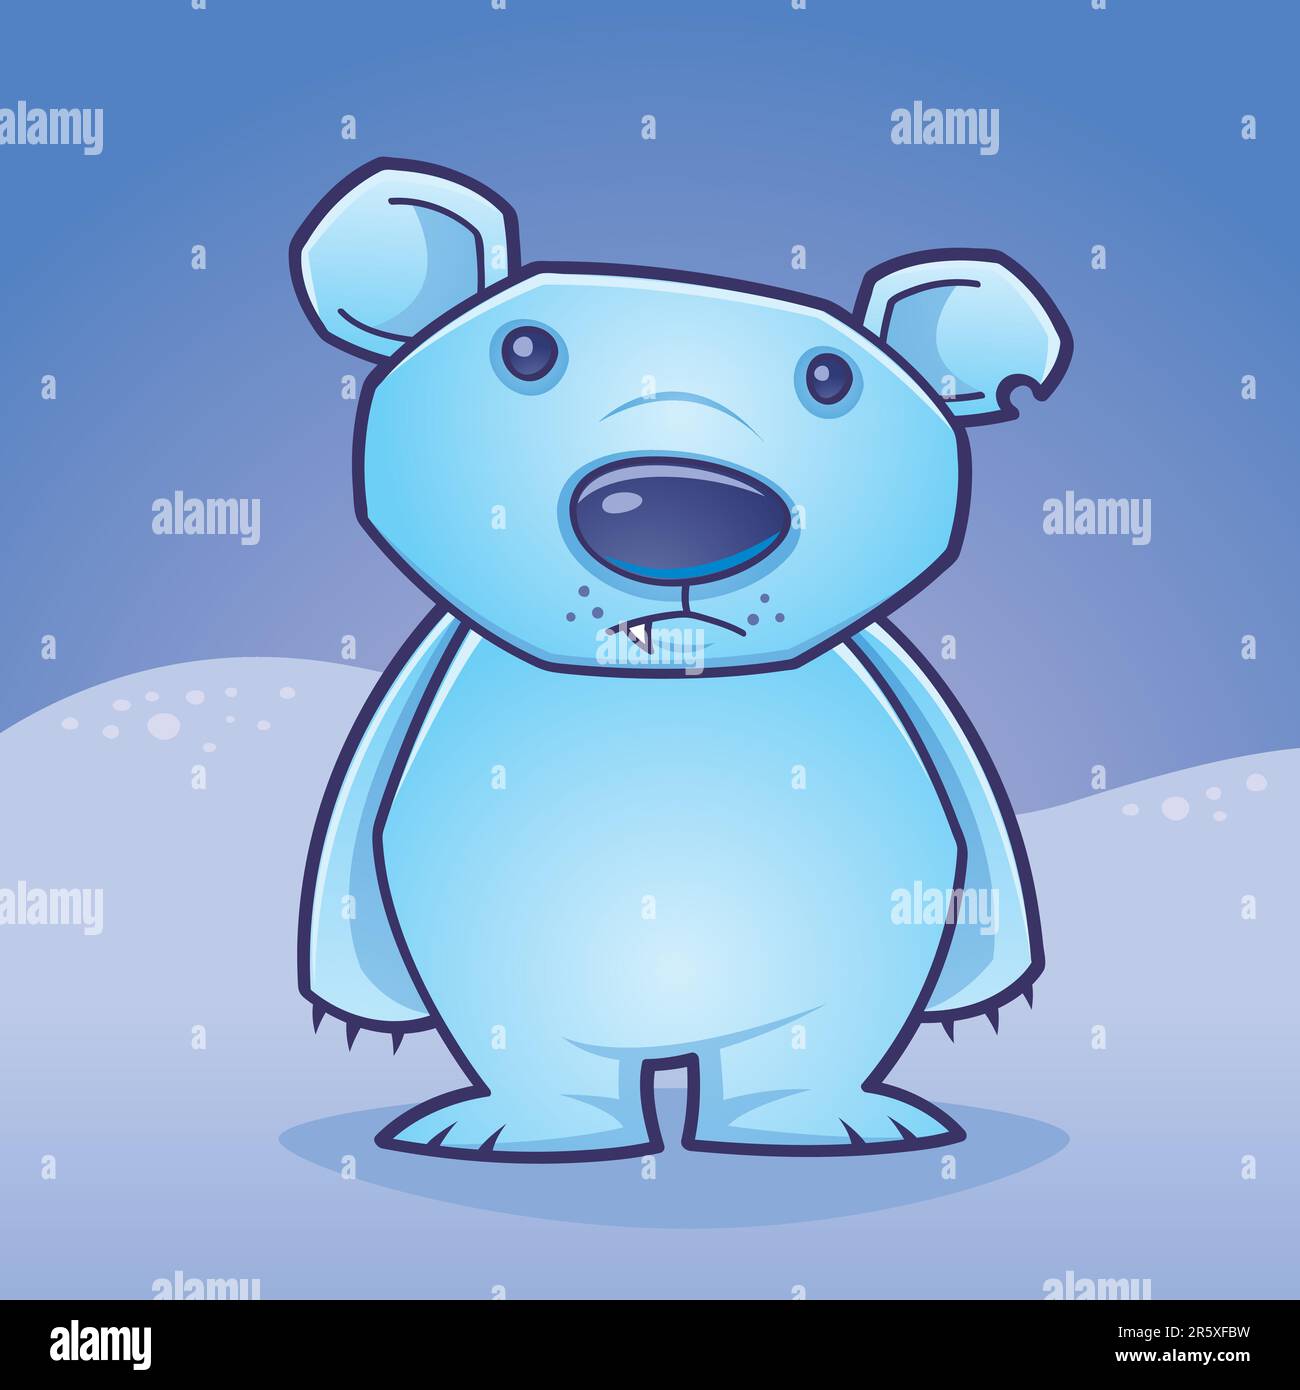 Cute polar bear cub standing in a snow covered landscape drawn in a humorous cartoon style. Stock Vector